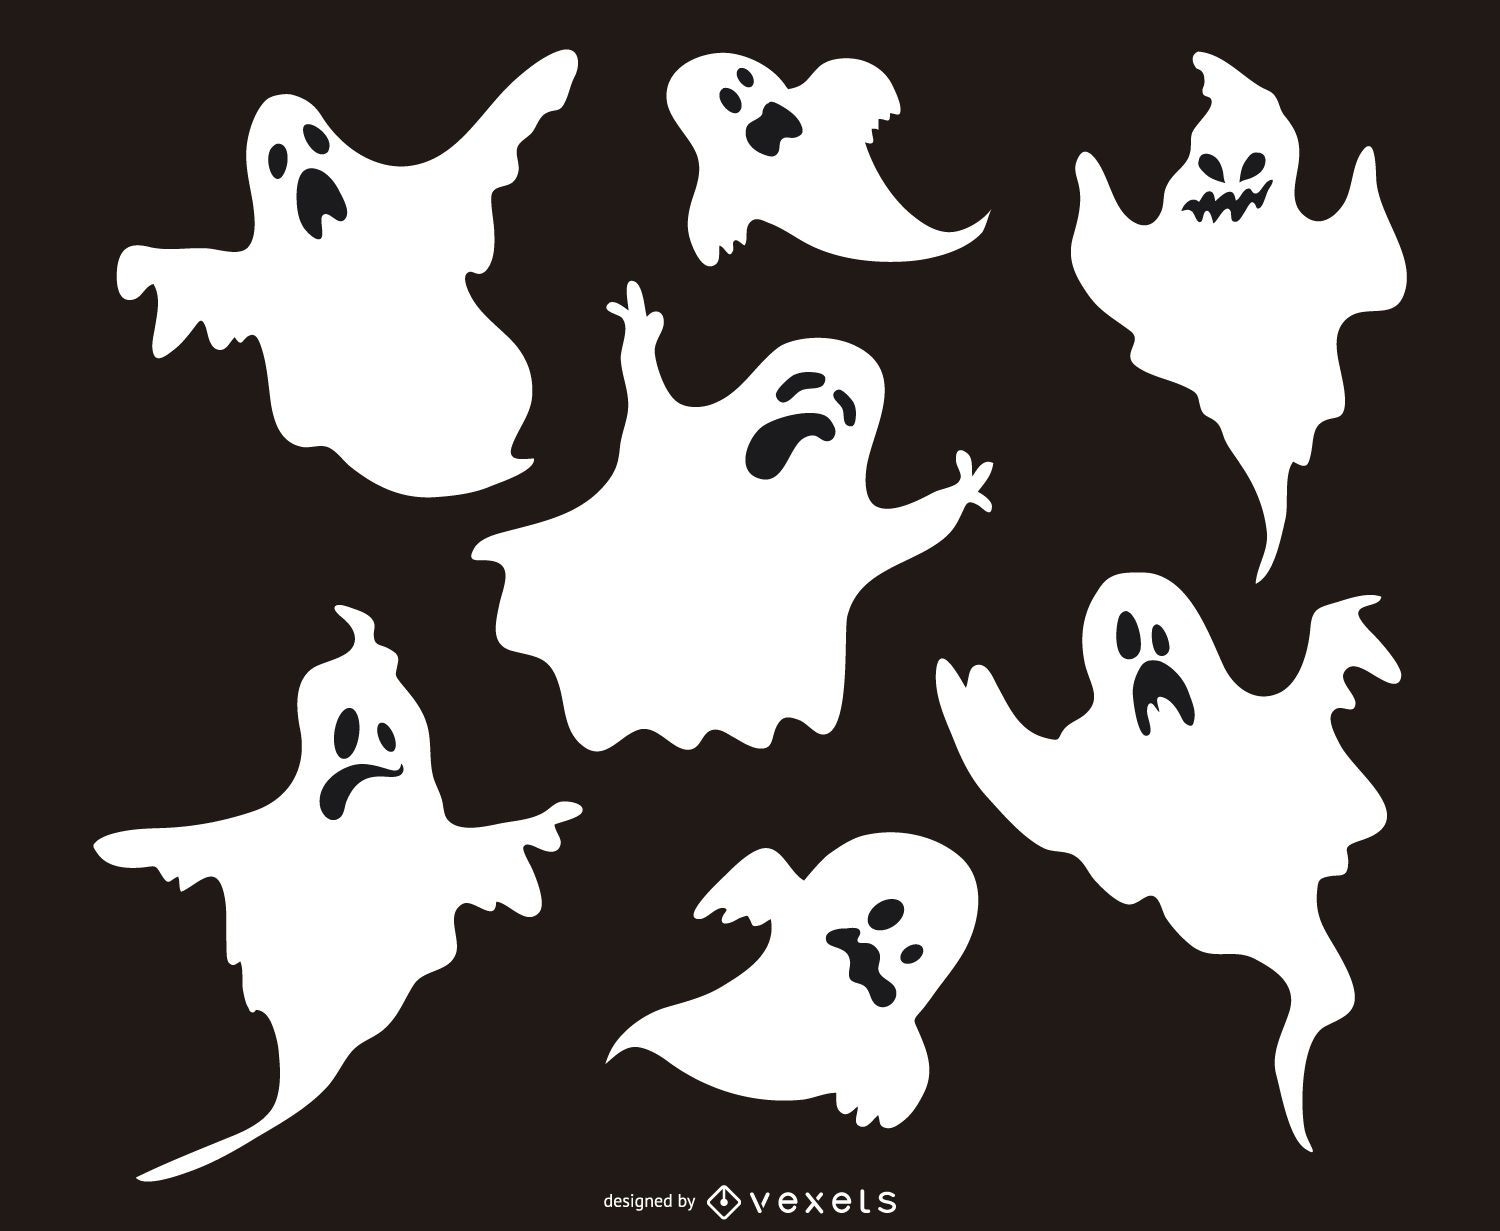 7 Ghost Silhouettes Set Vector Download